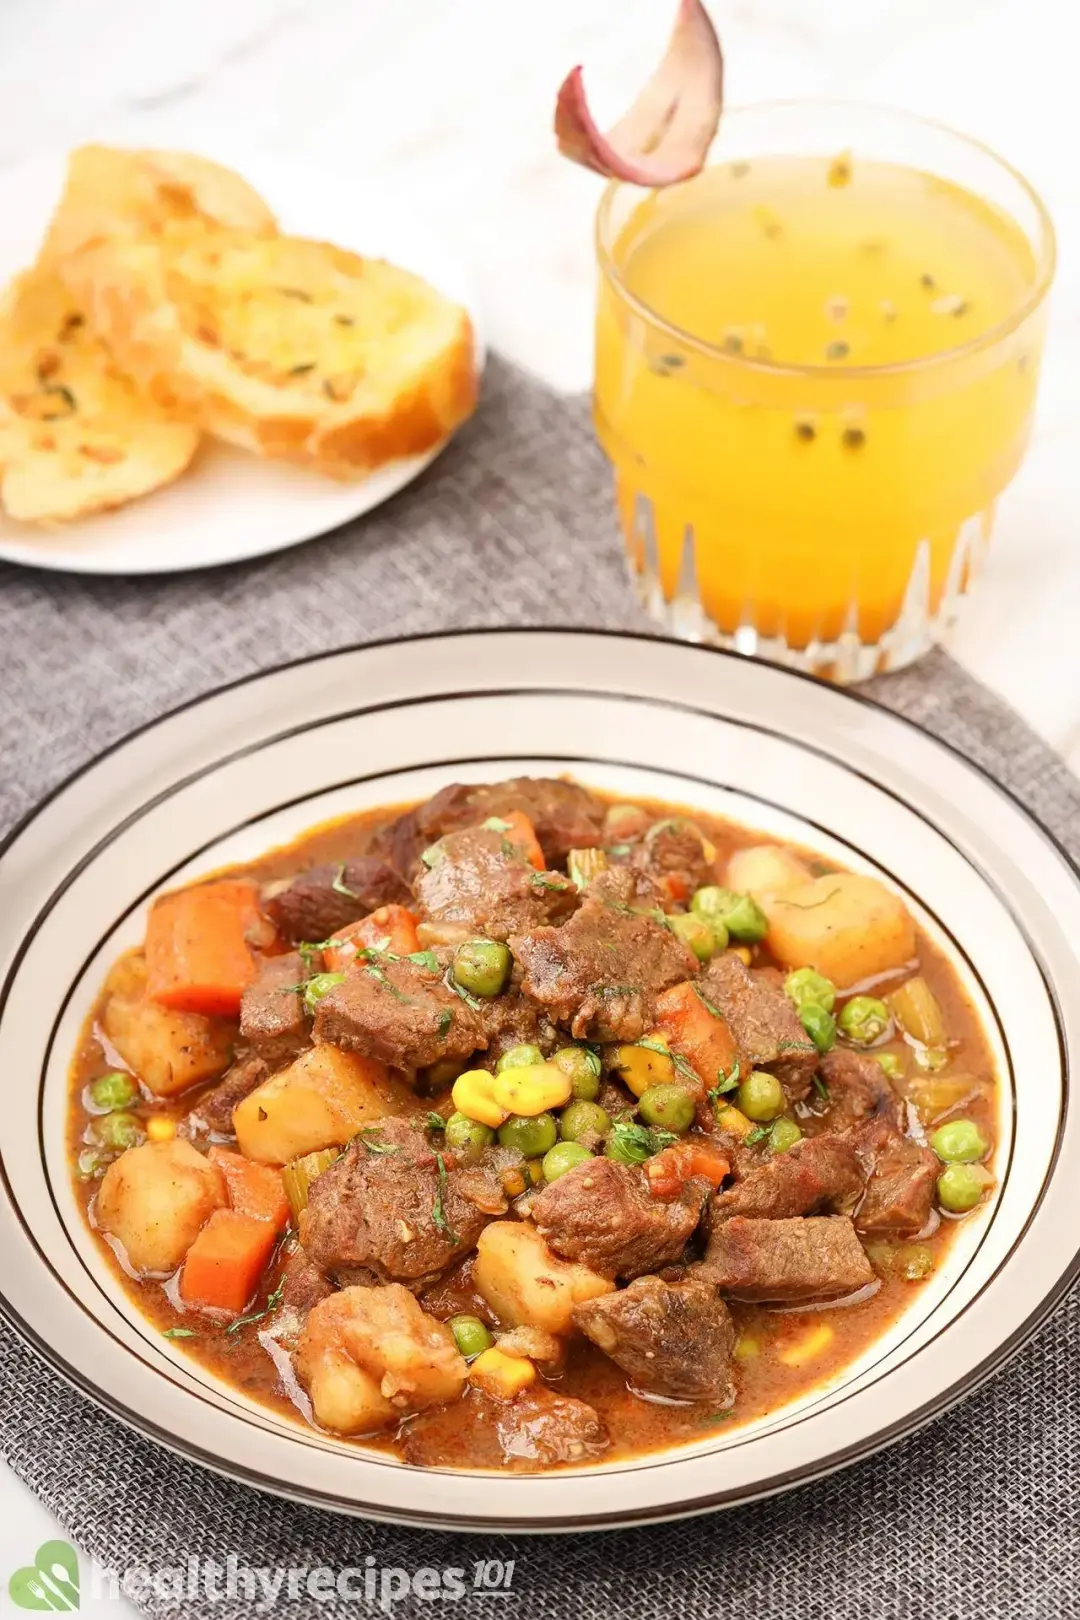 What to Serve With Vegetable Beef Soup